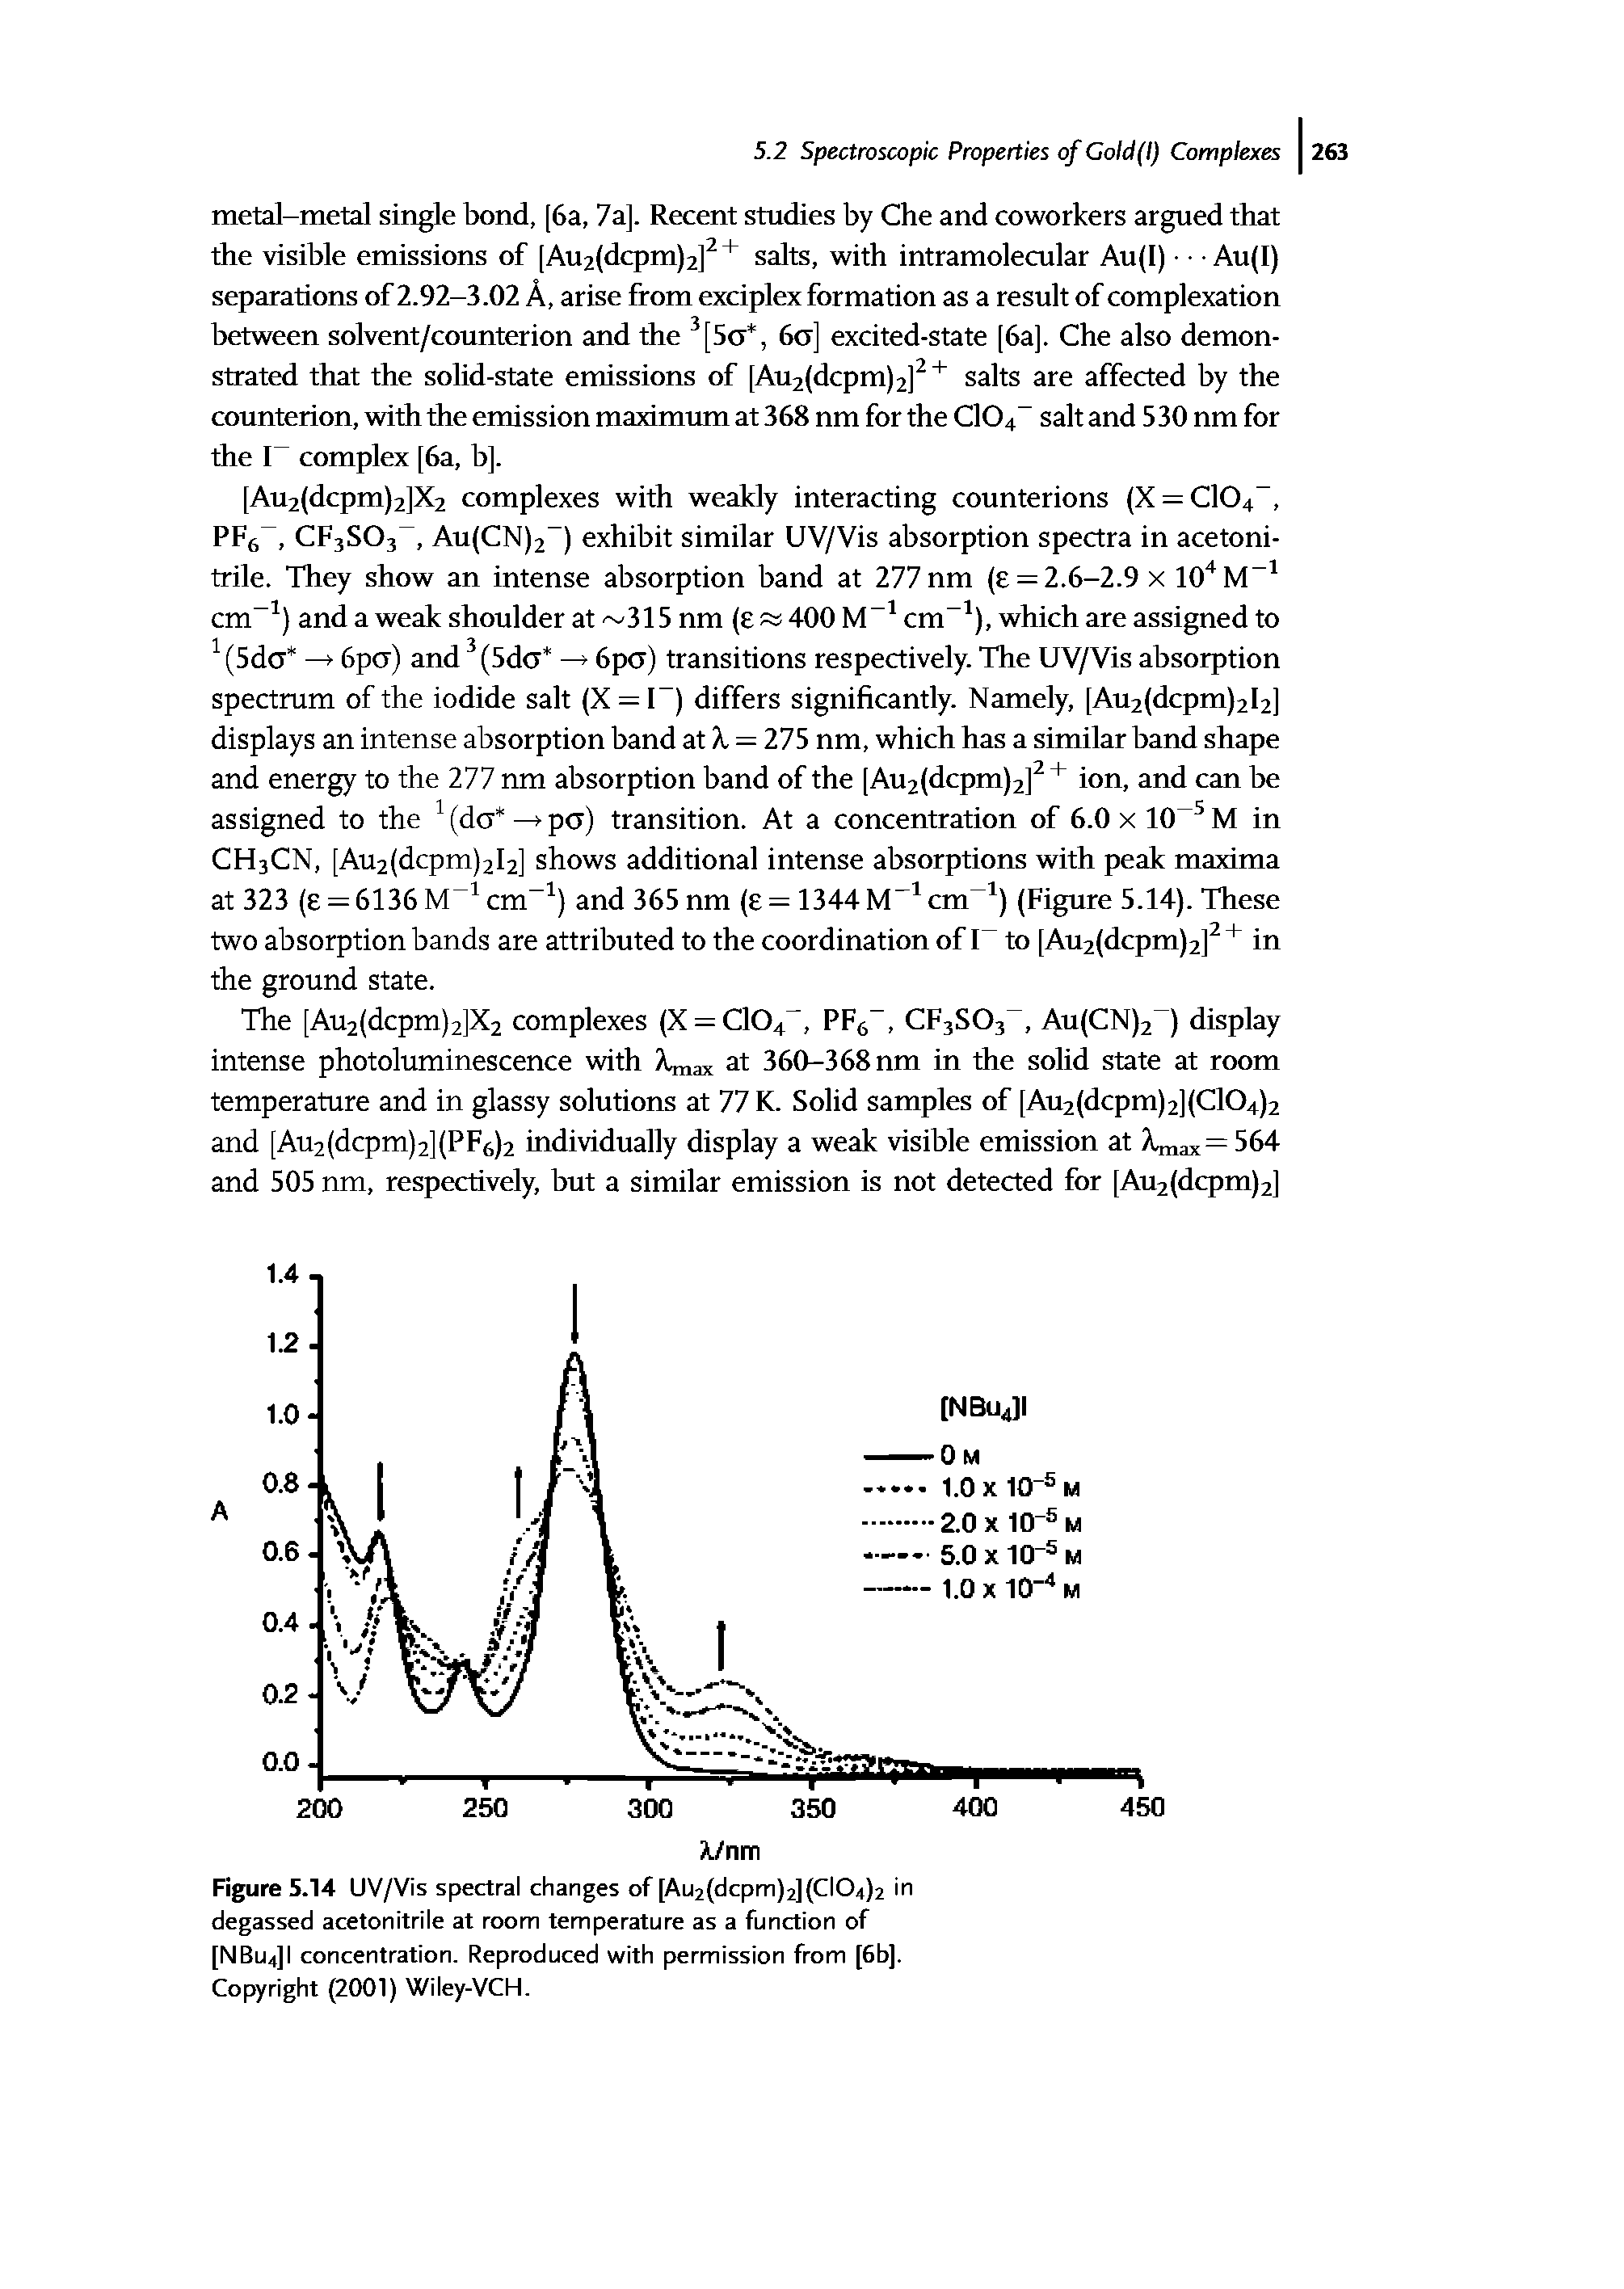 Figure 5.14 UV/Vis spectral changes of [Au2(dcpm)2](Cl04)2 in degassed acetonitrile at room temperature as a function of [NBu4]I concentration. Reproduced with permission from [6b]. Copyright (2001) Wiley-VCH.